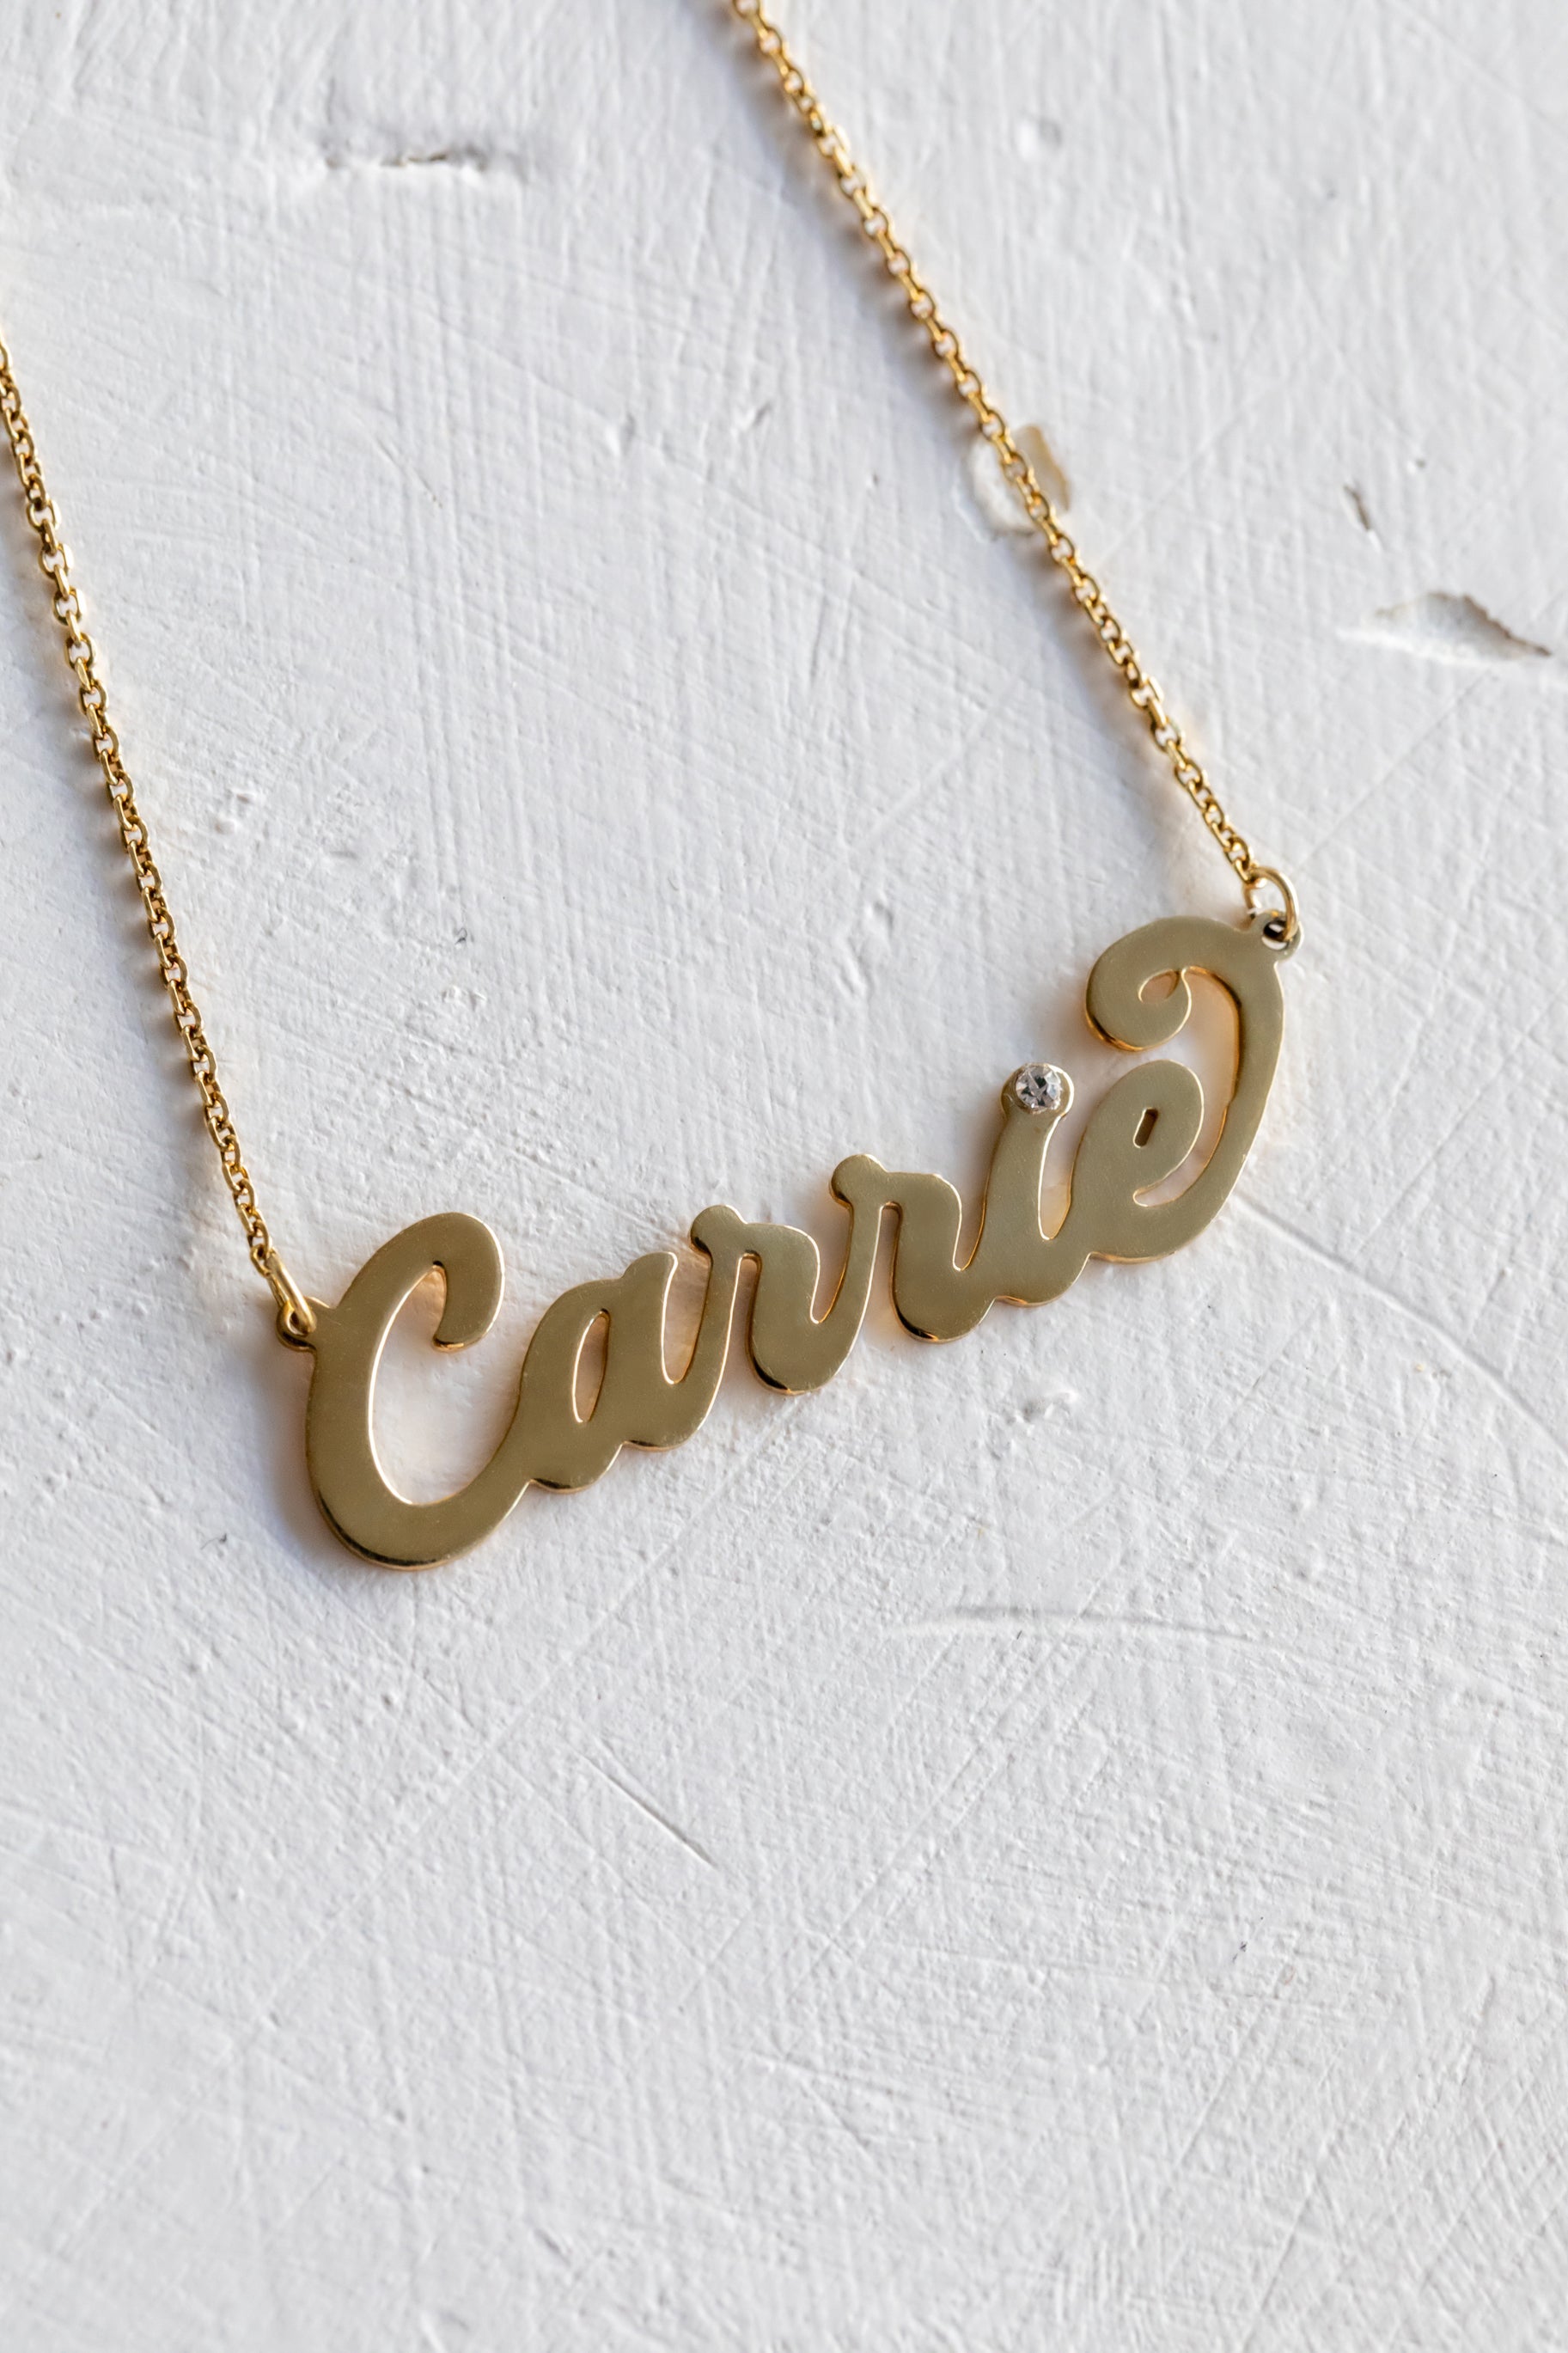 Carrie Name Necklace Silver